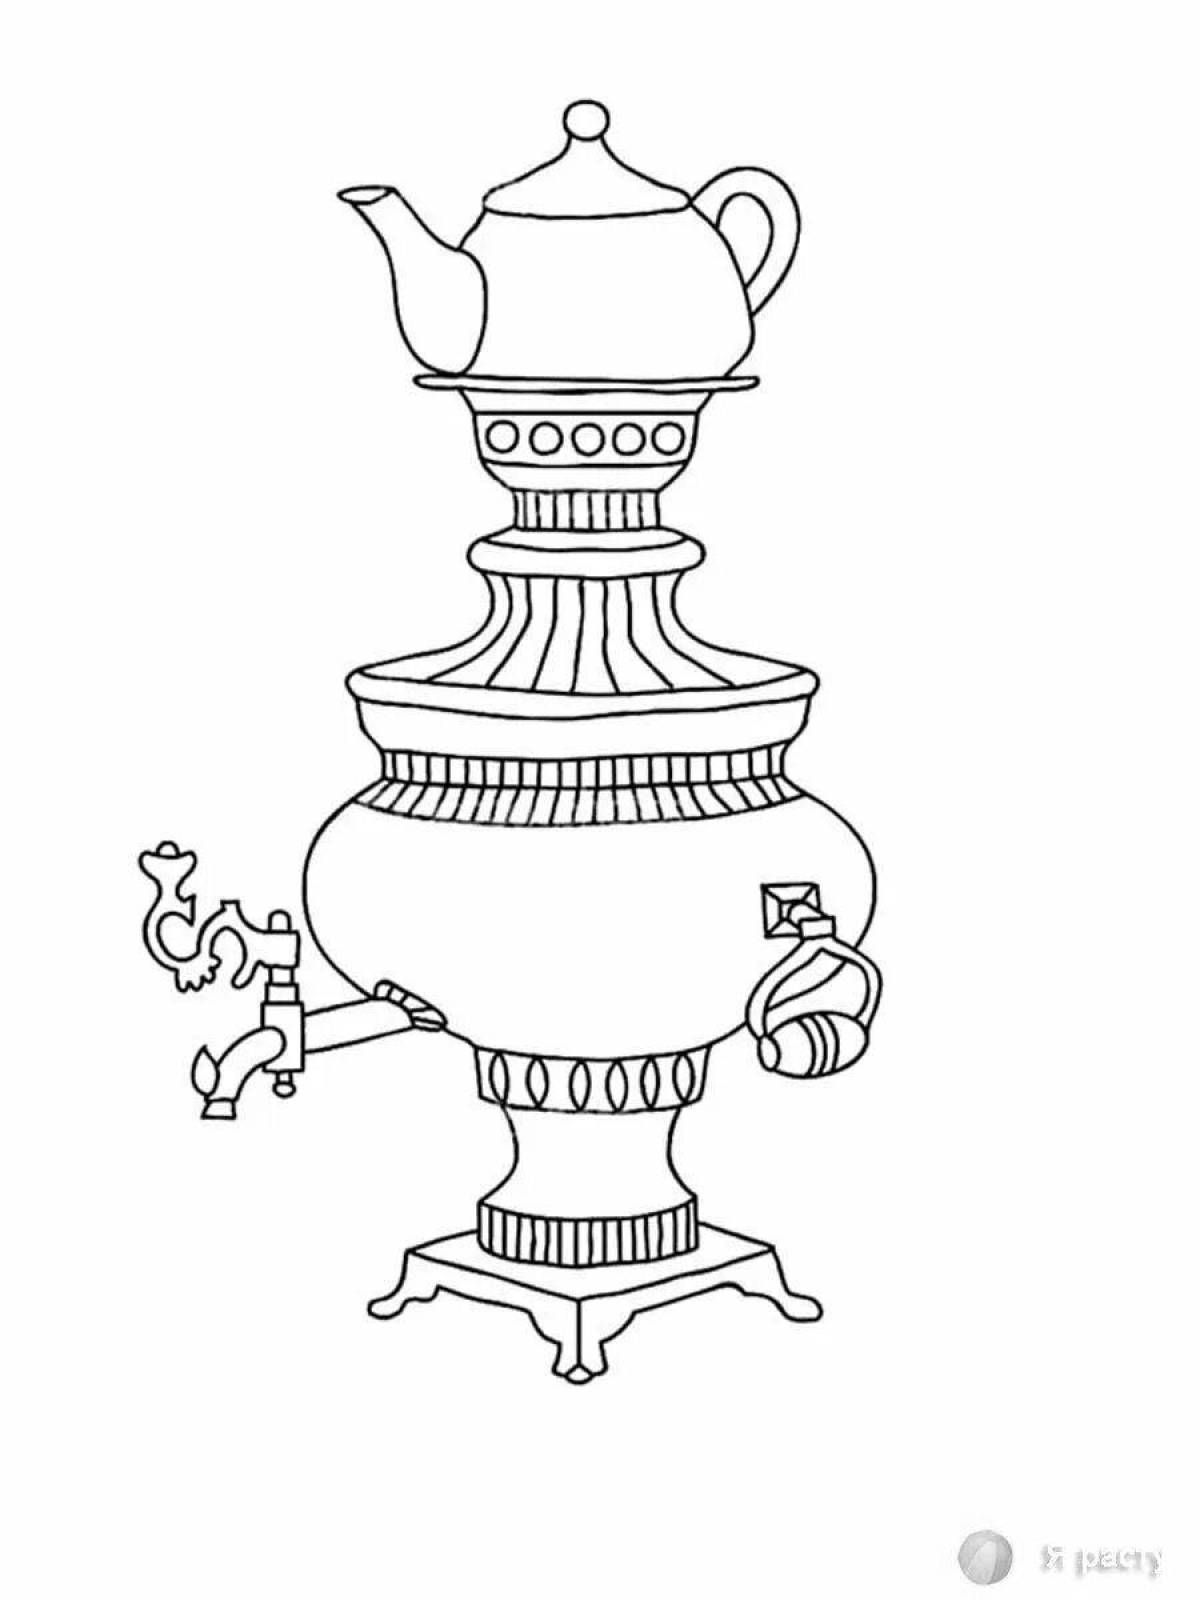 Attractive samovar pattern coloring book